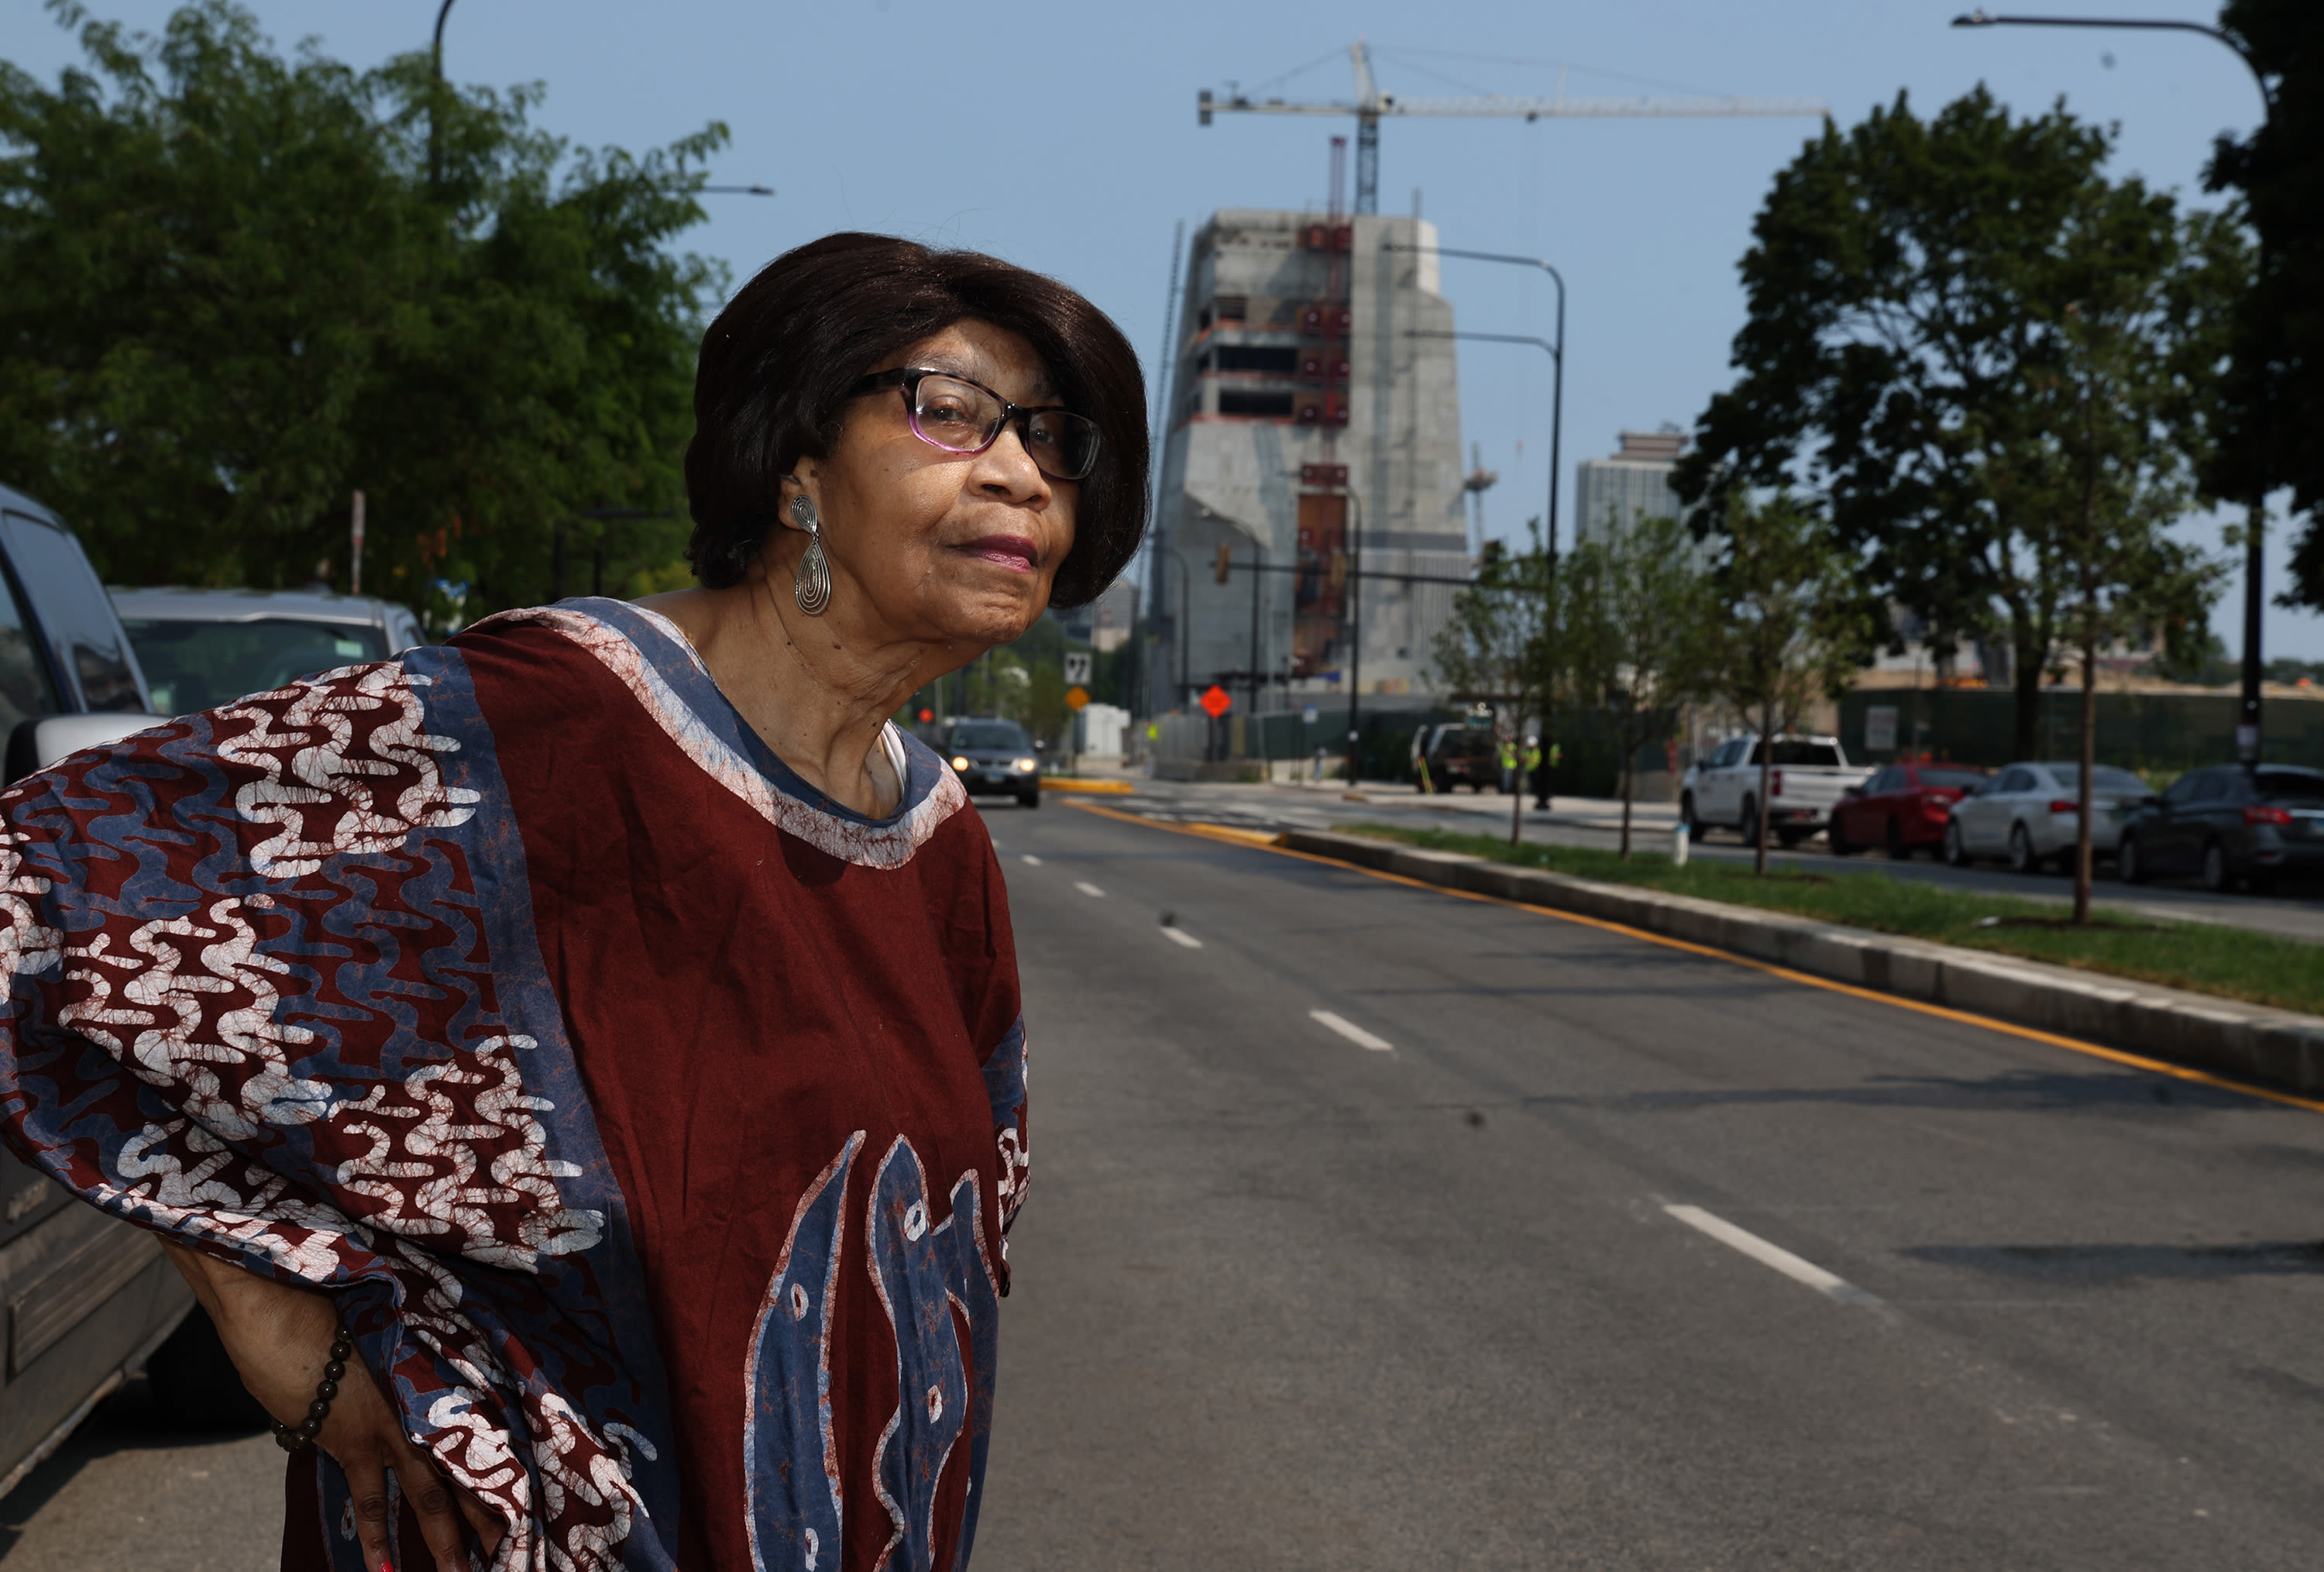 Chicago residents want protection from housing price increases near Obama Center